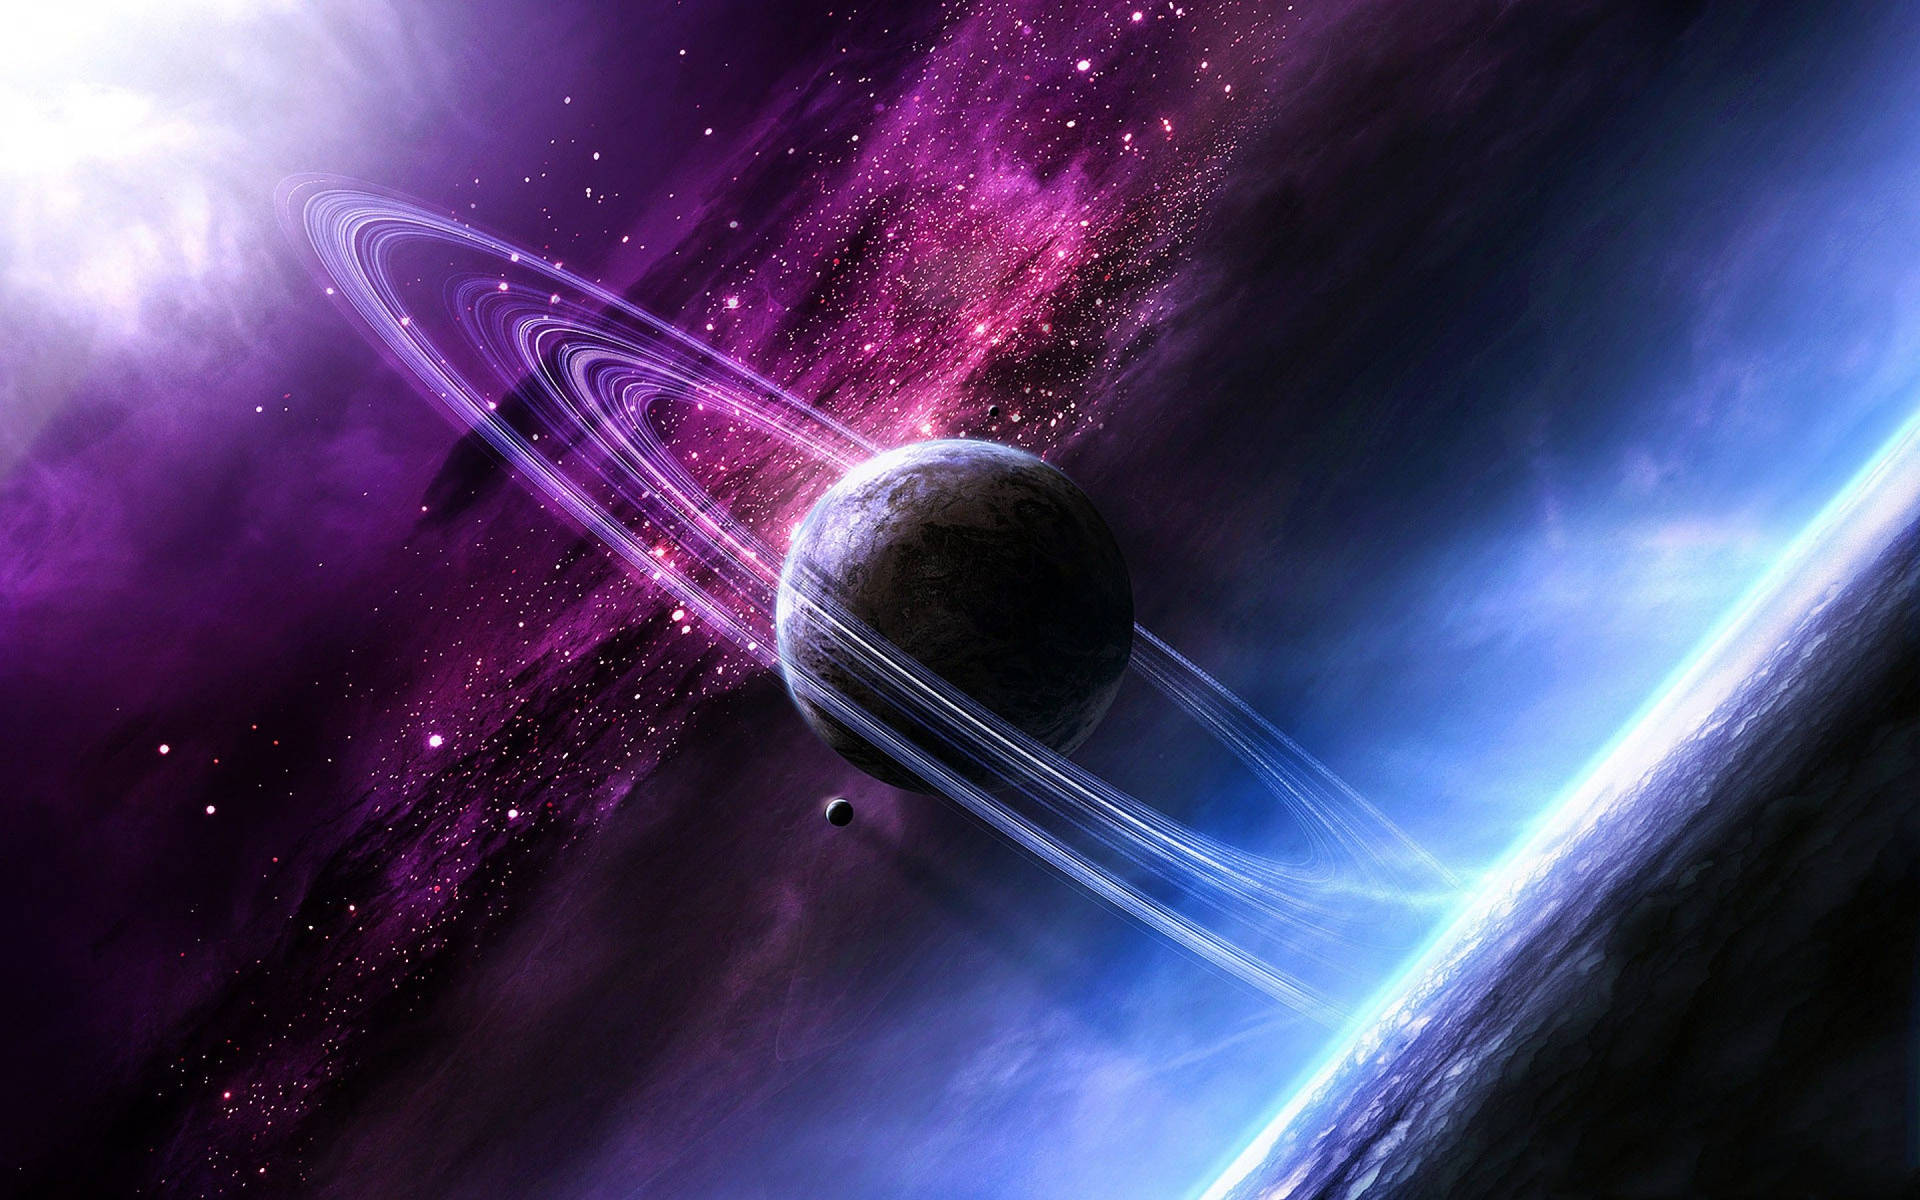 Free Space Wallpaper Downloads, [700+] Space Wallpapers for FREE |  